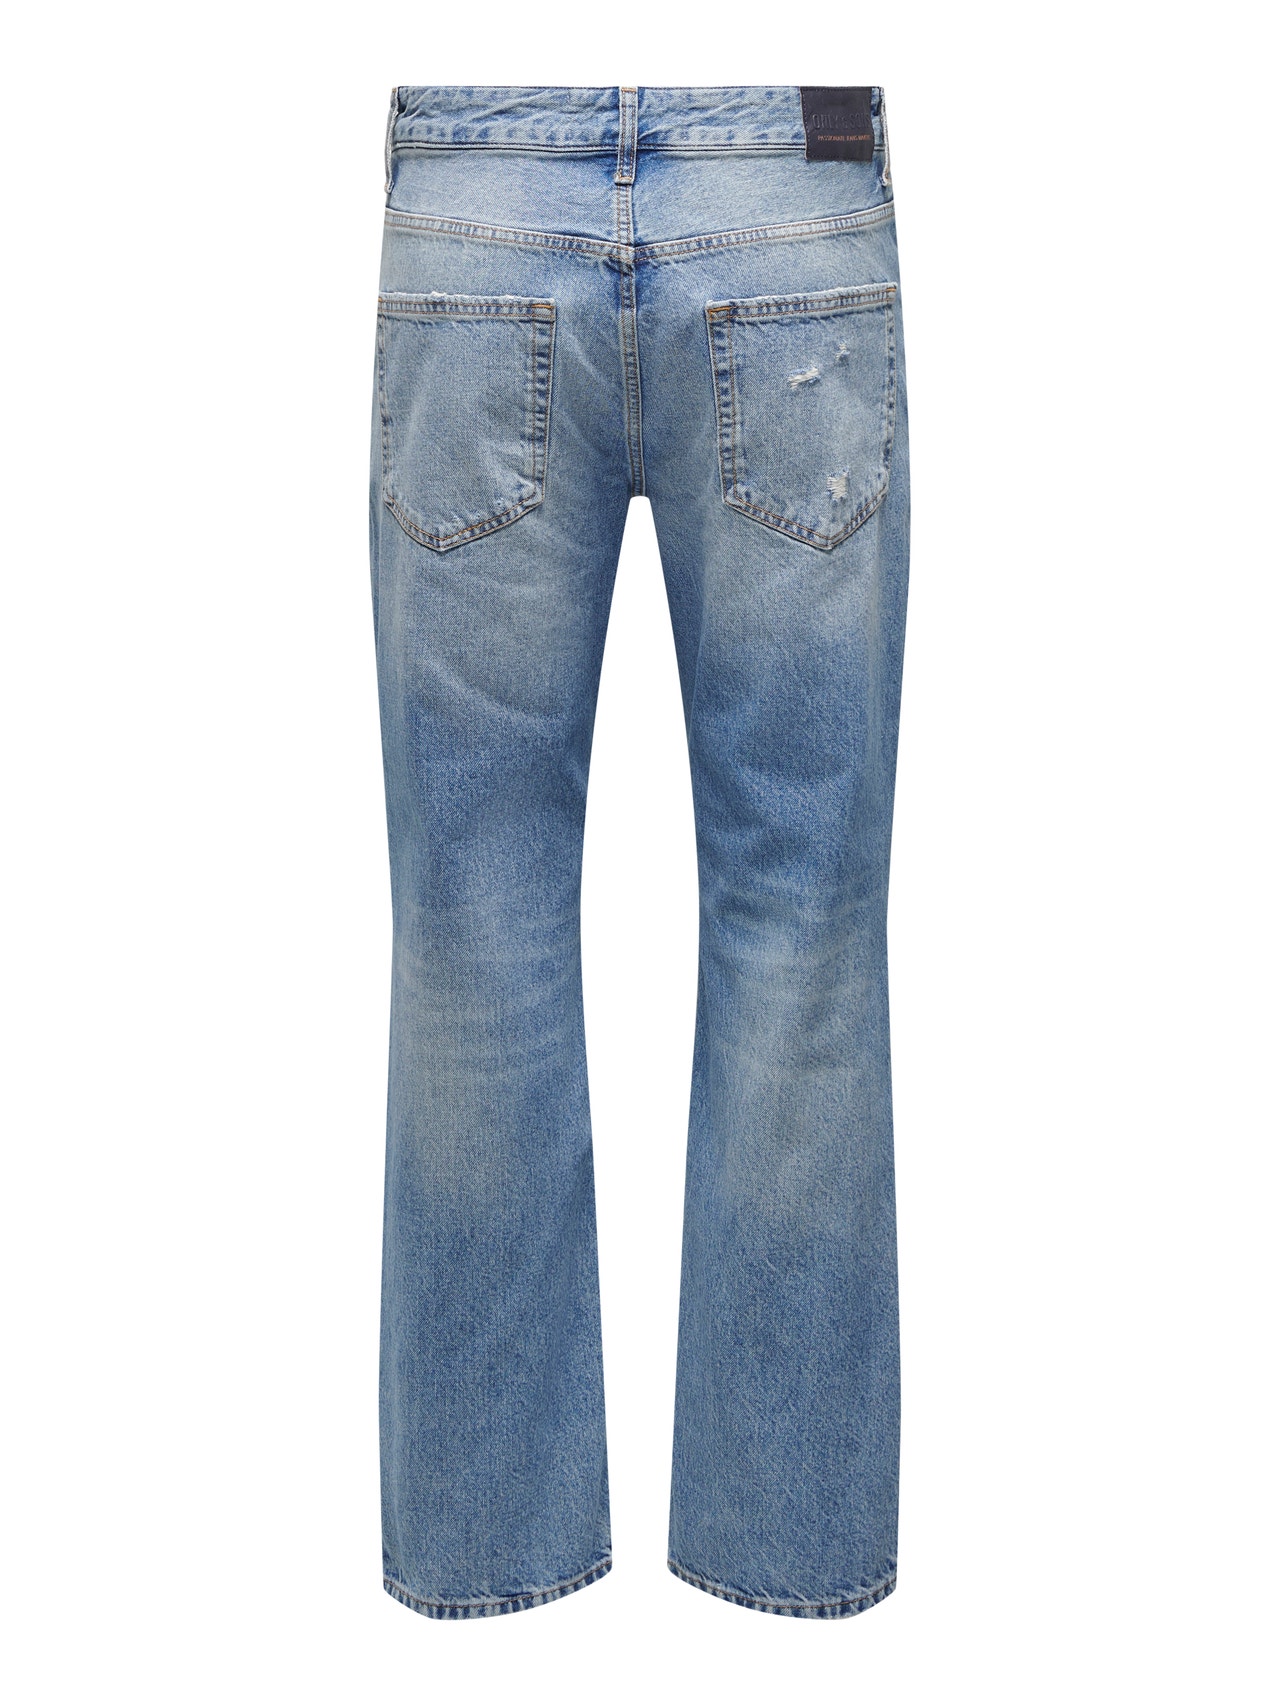 ONLY & SONS ONSEDGE LOOSE LIGHT BLUE 4067 JEANS NOOSONSEDGE LOOSE LIGHT BLUE 4067 JEANS NOOS -Light Blue Denim - 22024067